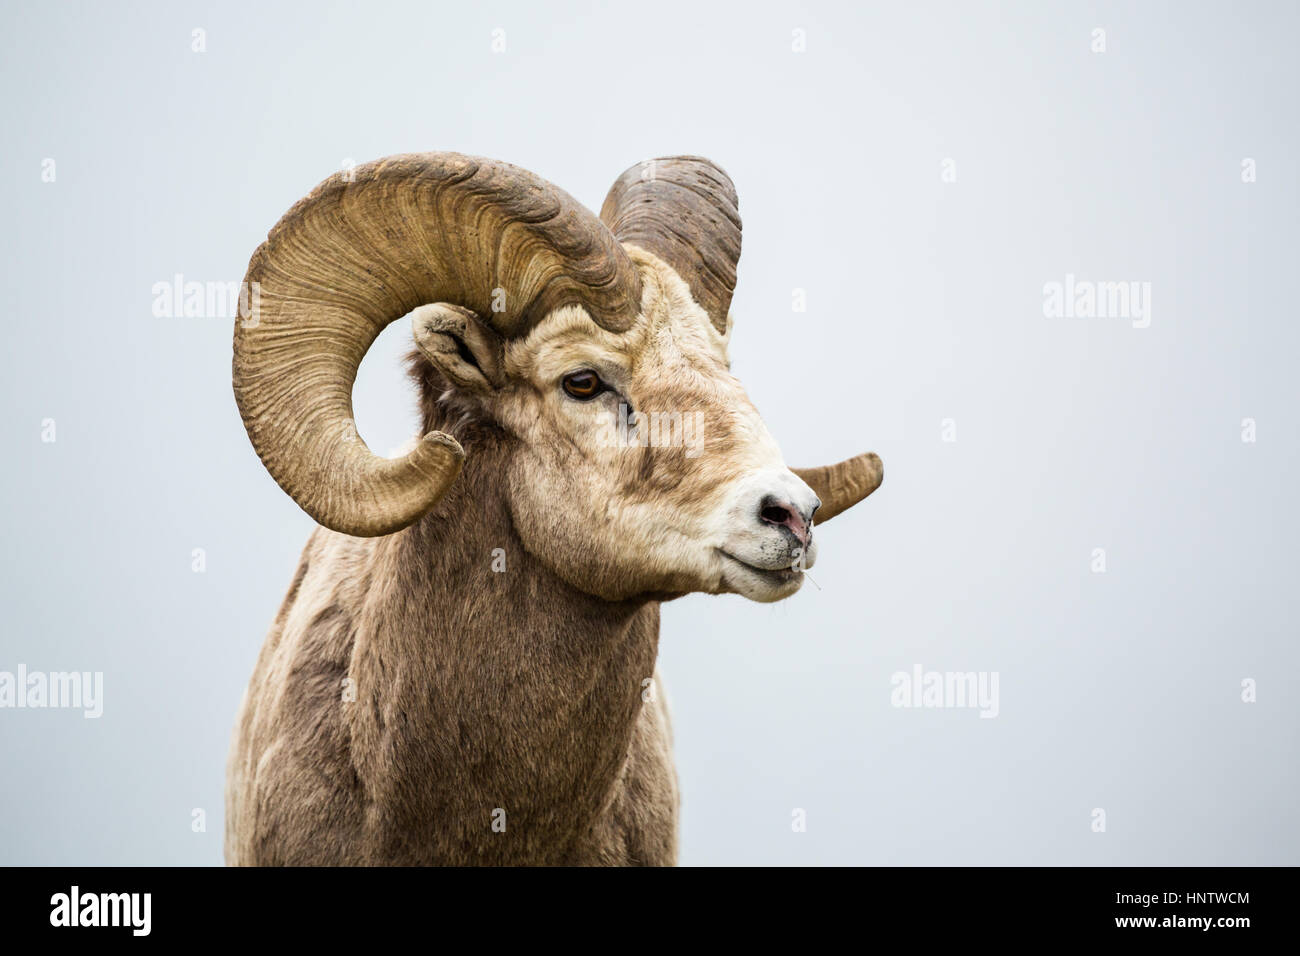 Close up of head and horns of a wild big horned sheep in Southern Canada. Background is a neutral grey fog over a lake. Stock Photo